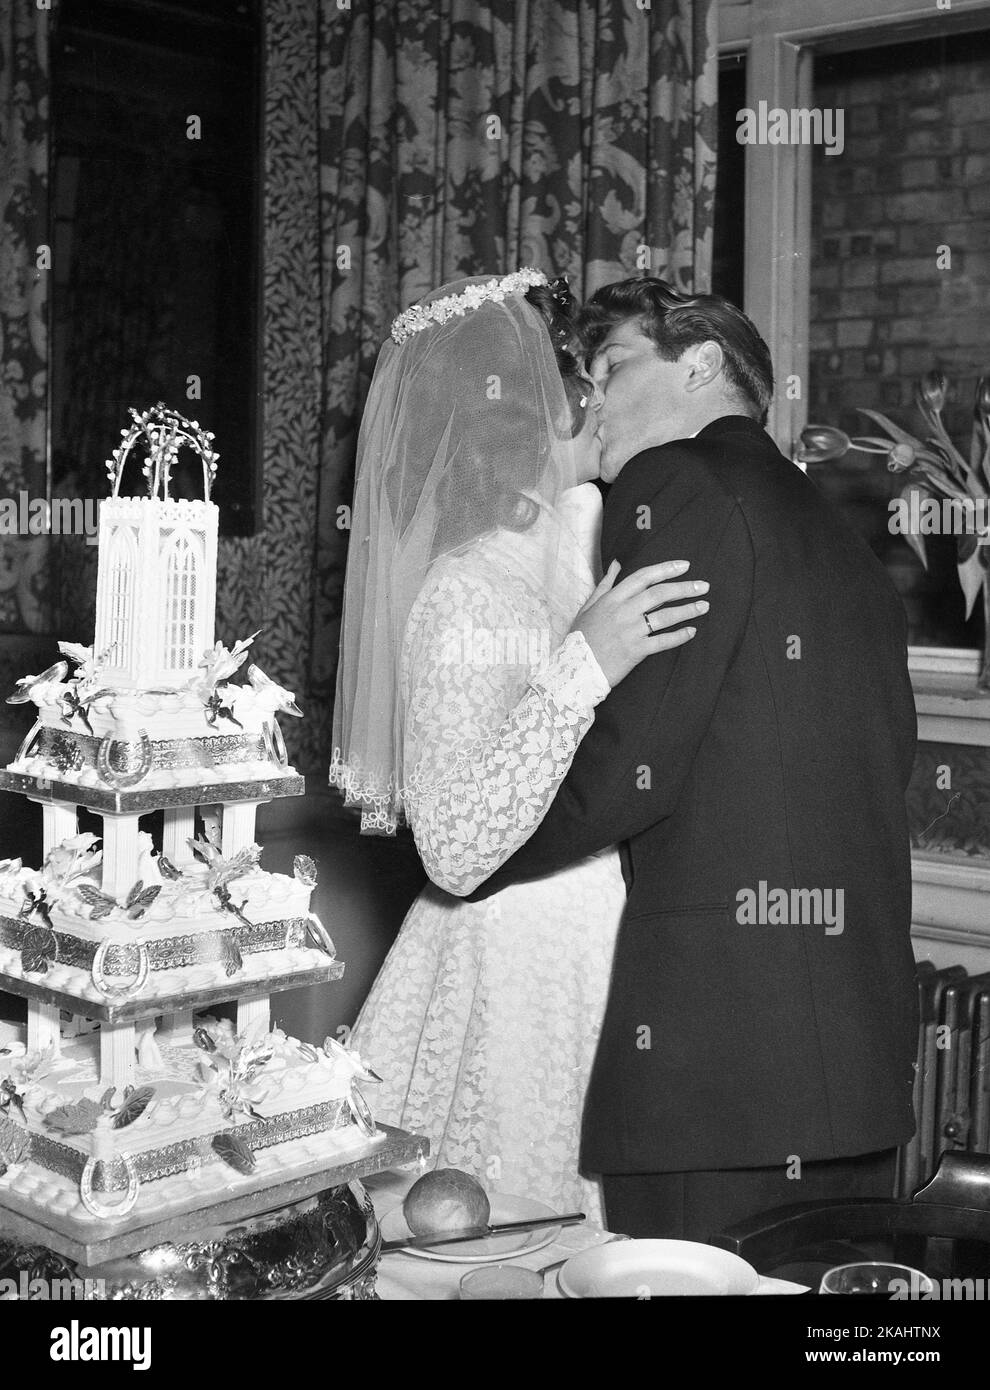 Wedding Day of Mr & Mrs Francis of 23 Myrtle Road, London E17 c1952 The newly-wed happy couple kiss by the wedding cake  Photo by Tony Henshaw Archive Stock Photo